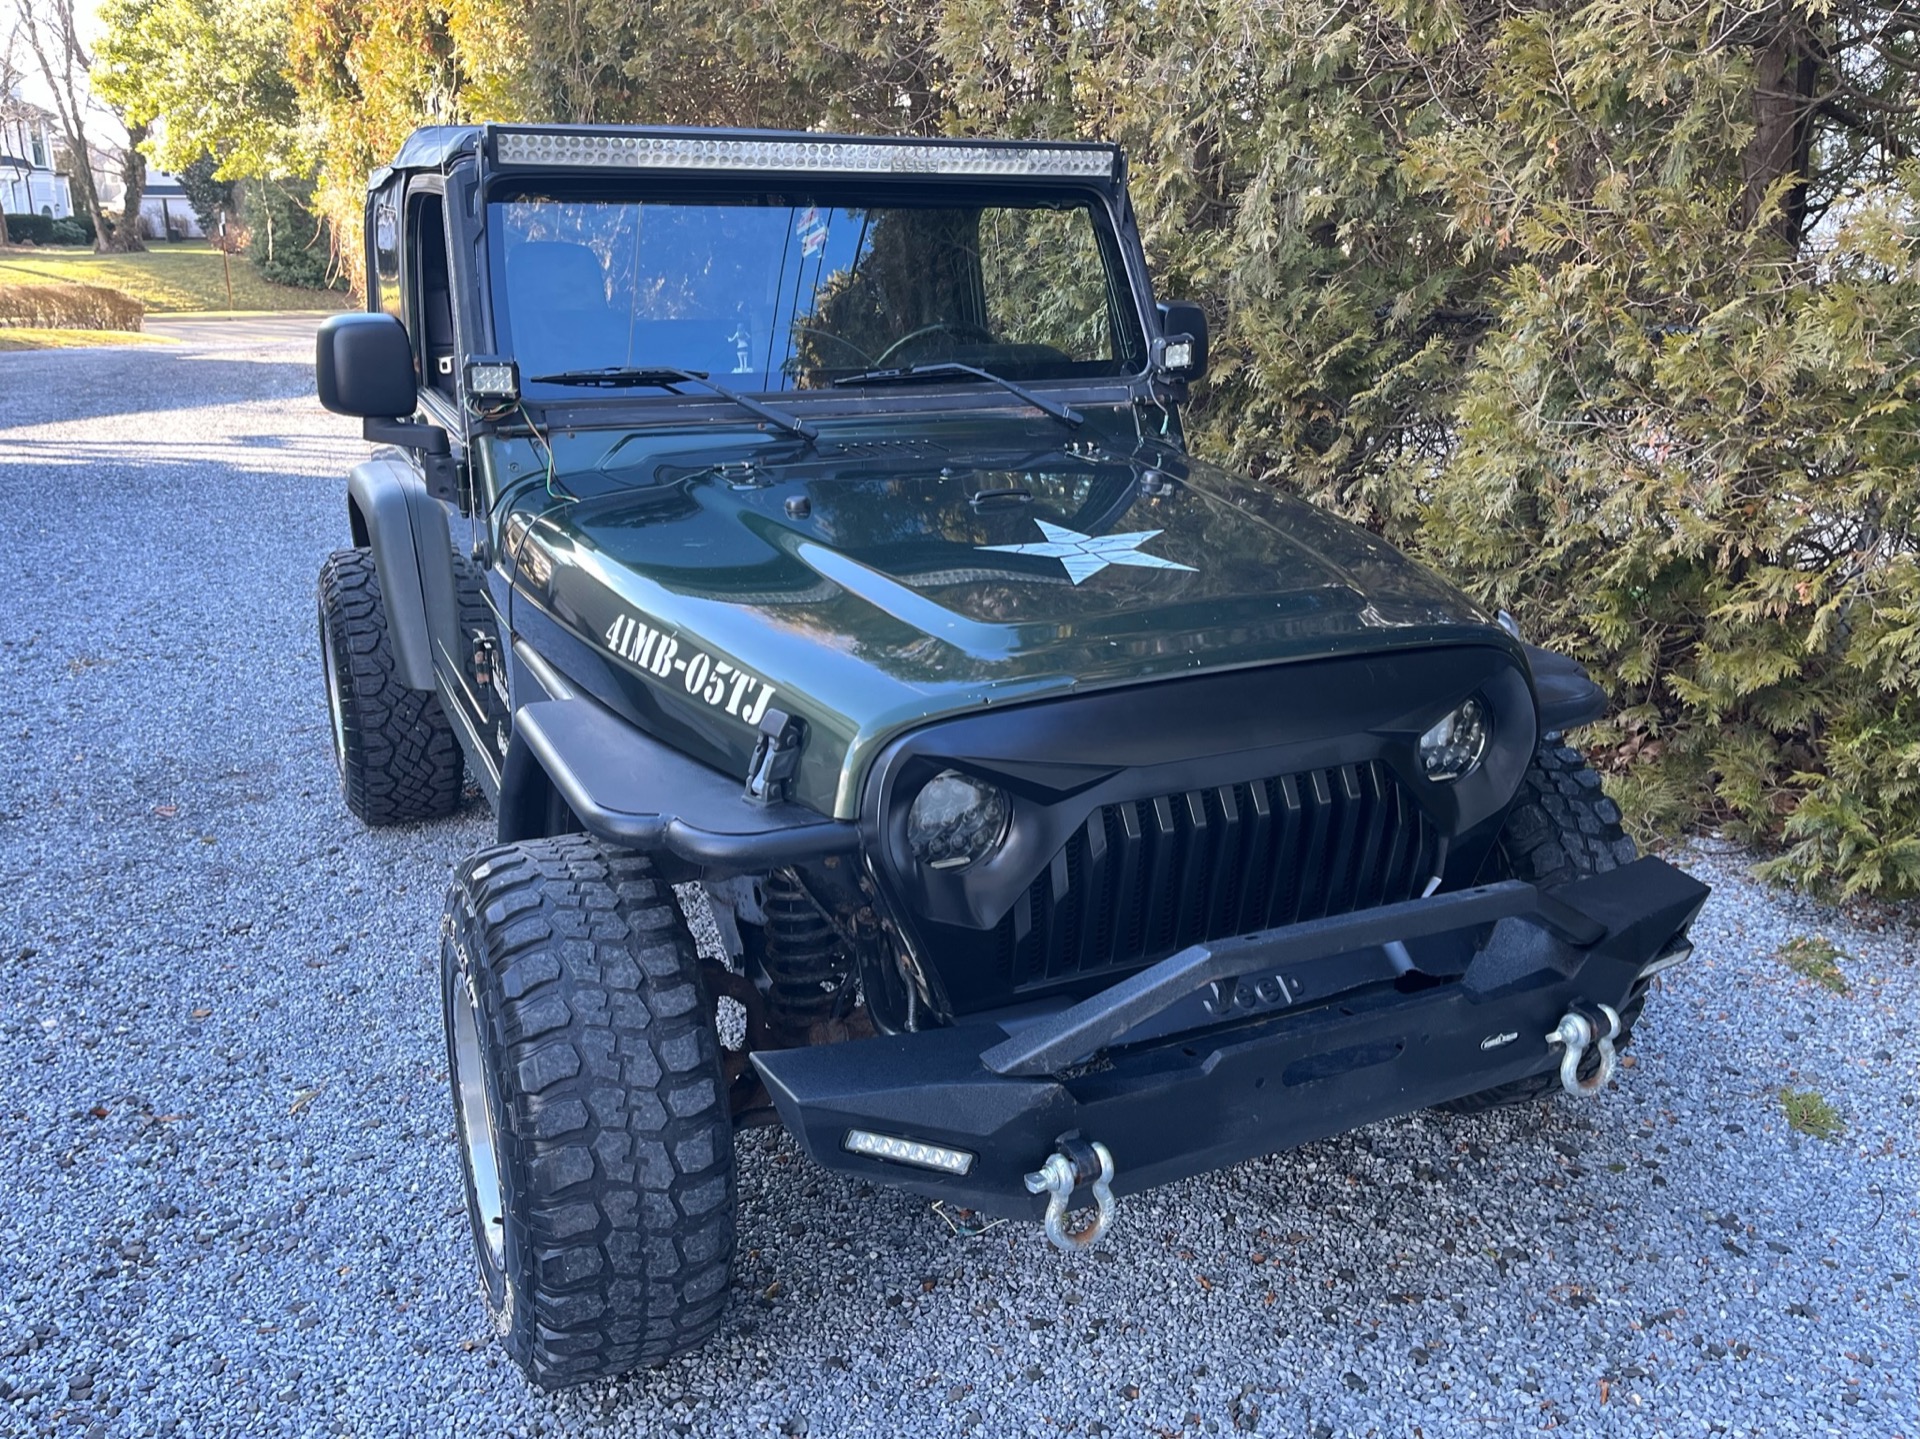 Used-2005-Jeep-Wrangler-Willys-Edition-TJ